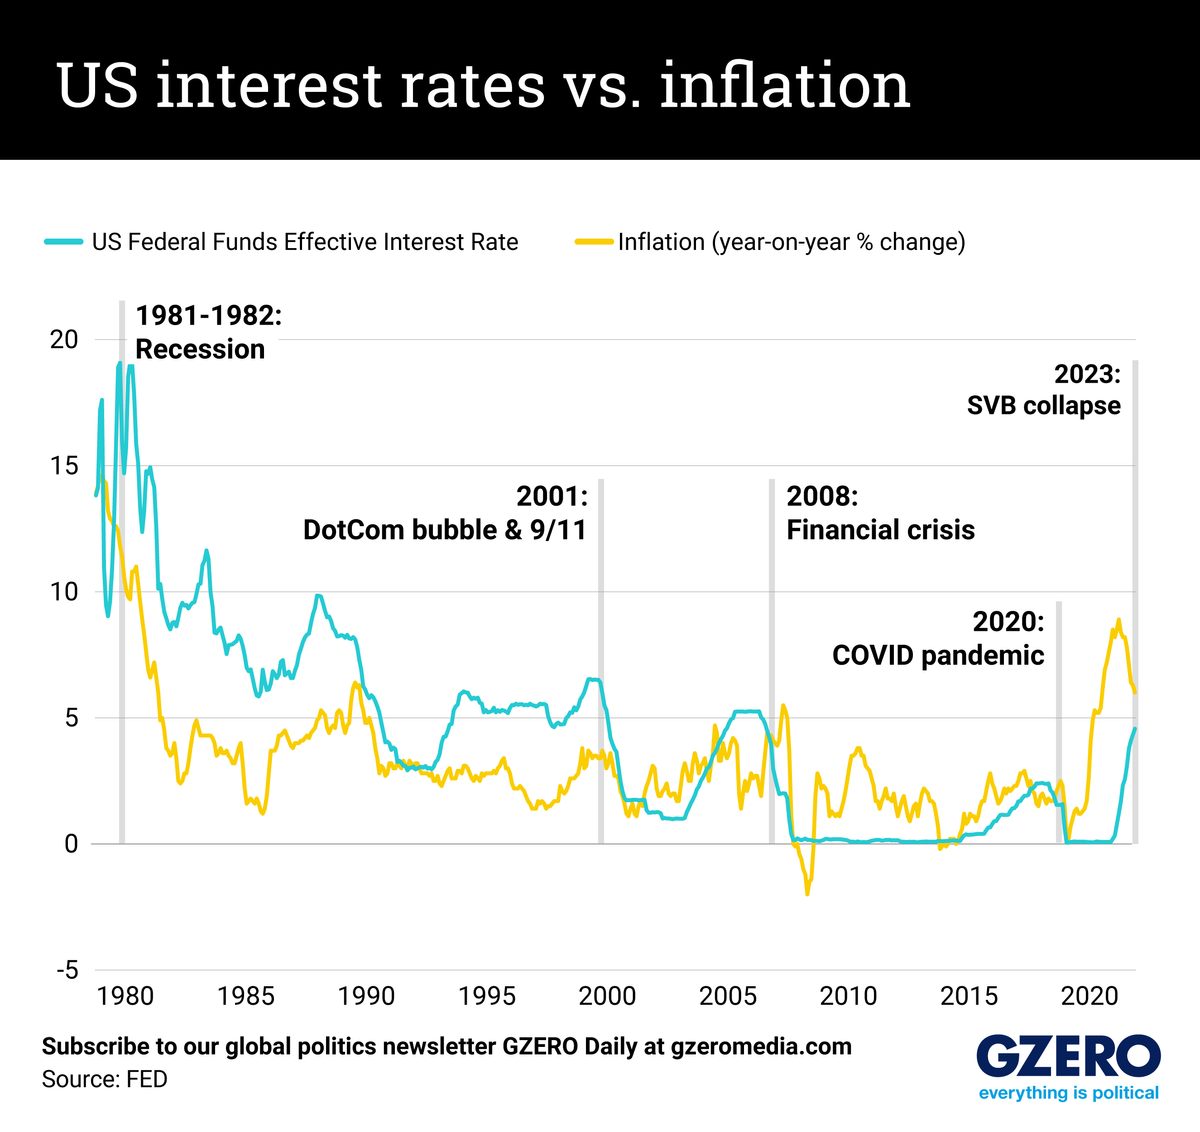 A graph comparing the US Federal Funds Effective Interest Rate with the year-on-year percentage change in inflation.